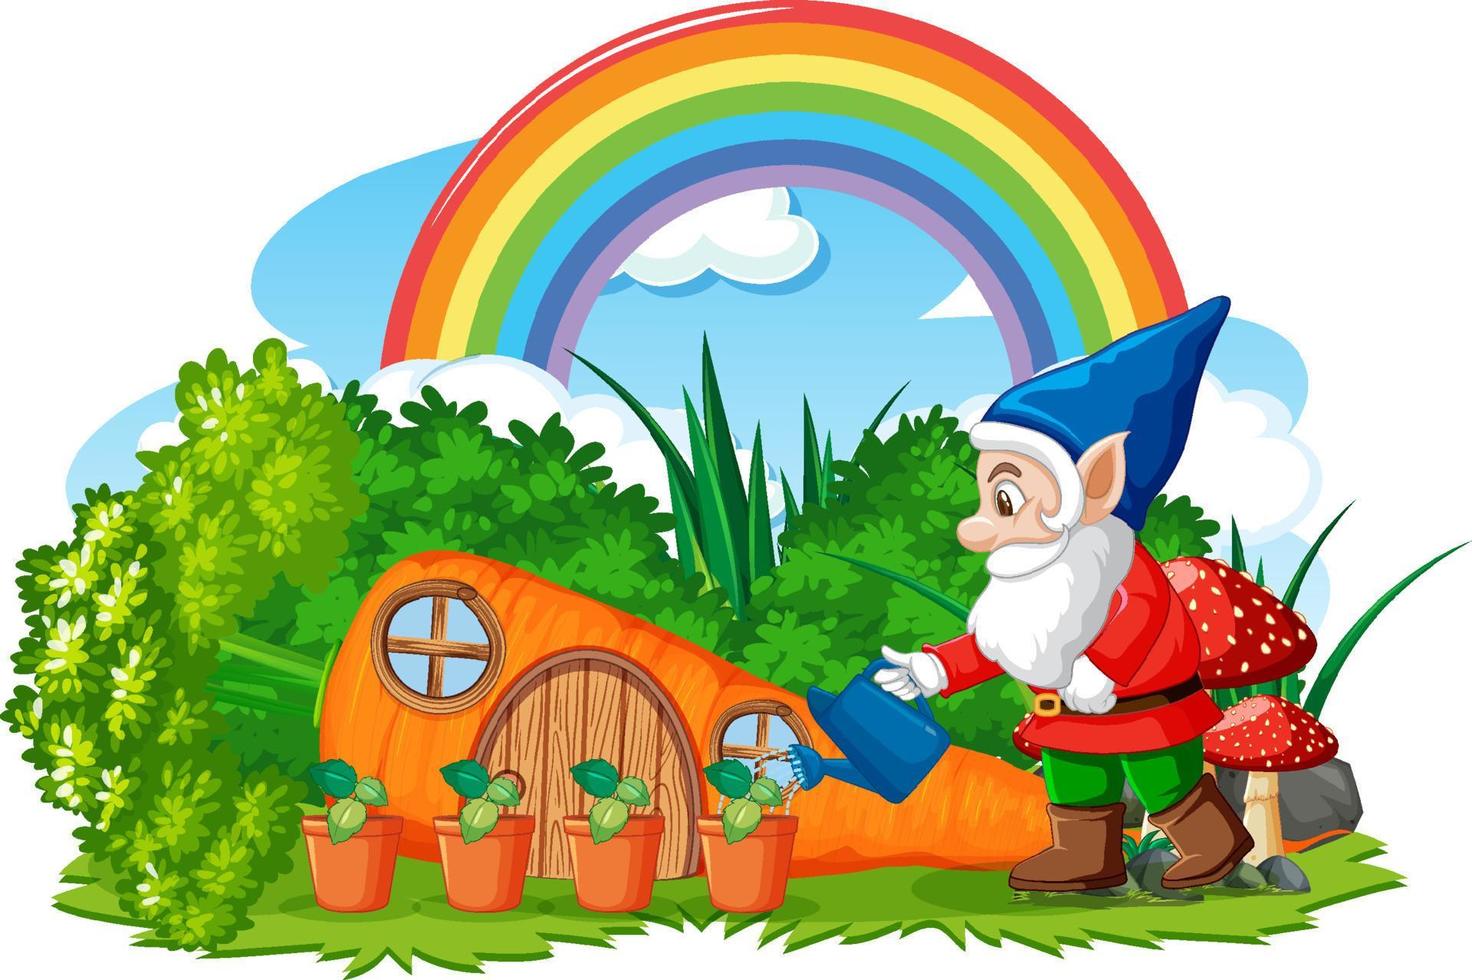 Fantasy carrot house with rainbow in the sky vector